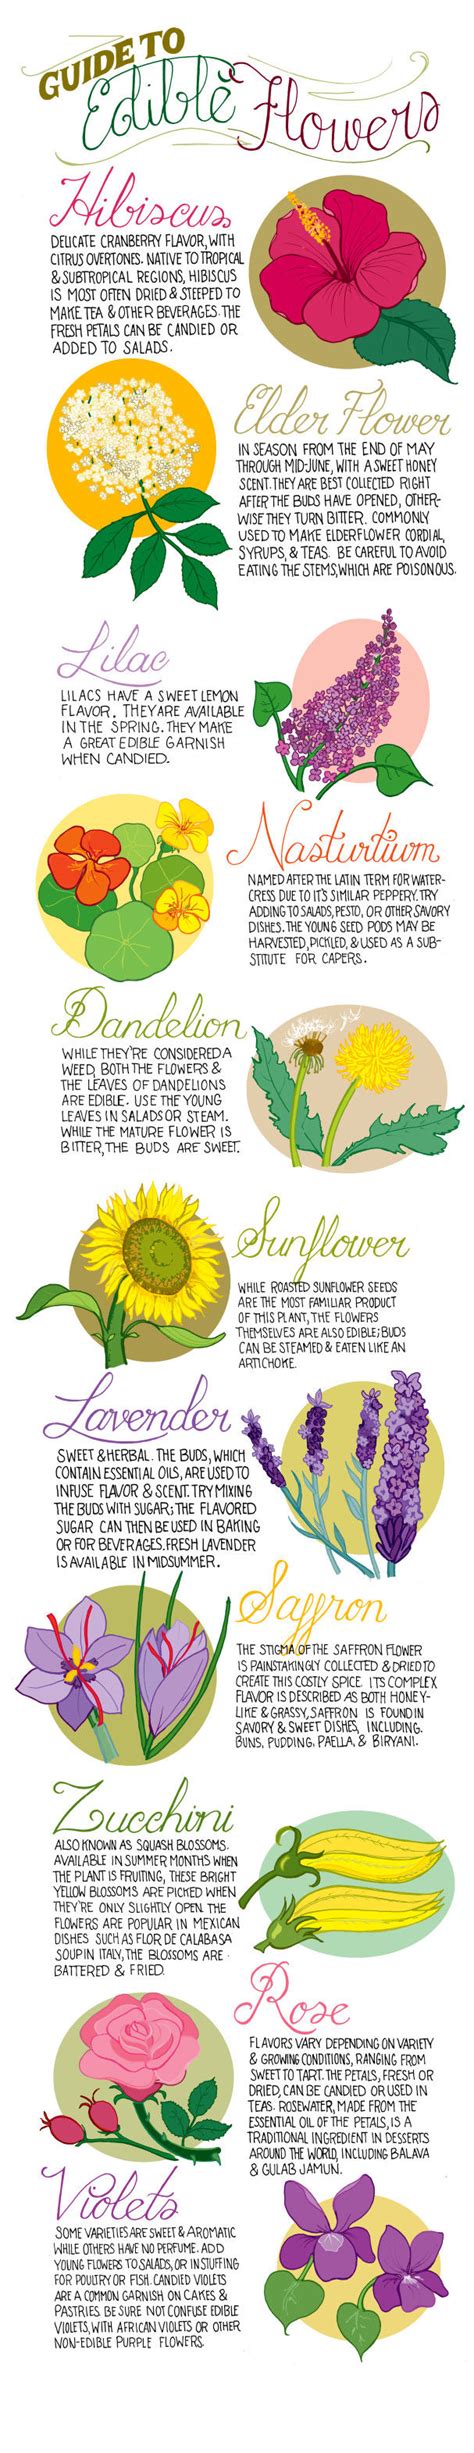 Guide To Edible Flowers Pictures Photos And Images For Facebook